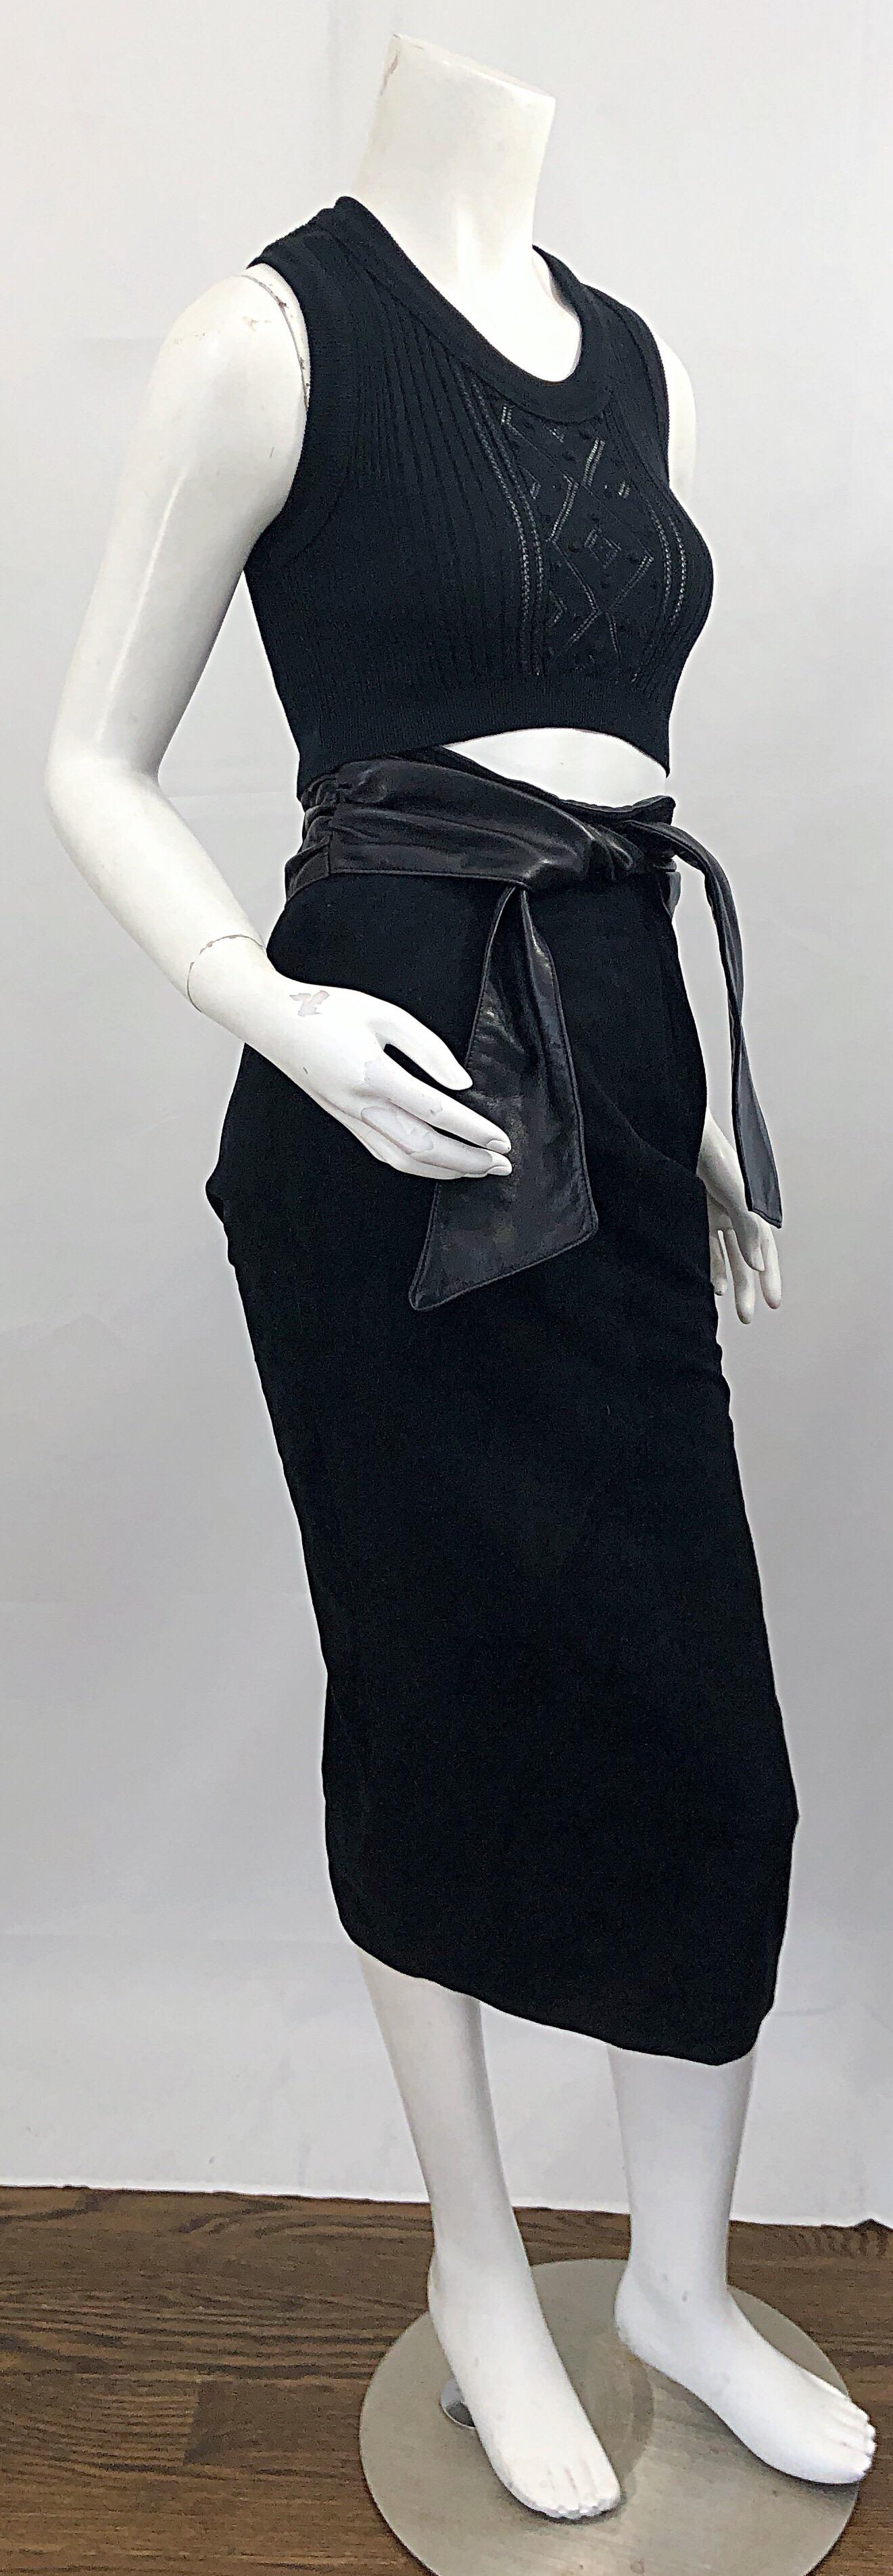 Women's 1990s Vakko Black Suede + Leather Size 4 High Waisted Vintage 90s Midi Skirt